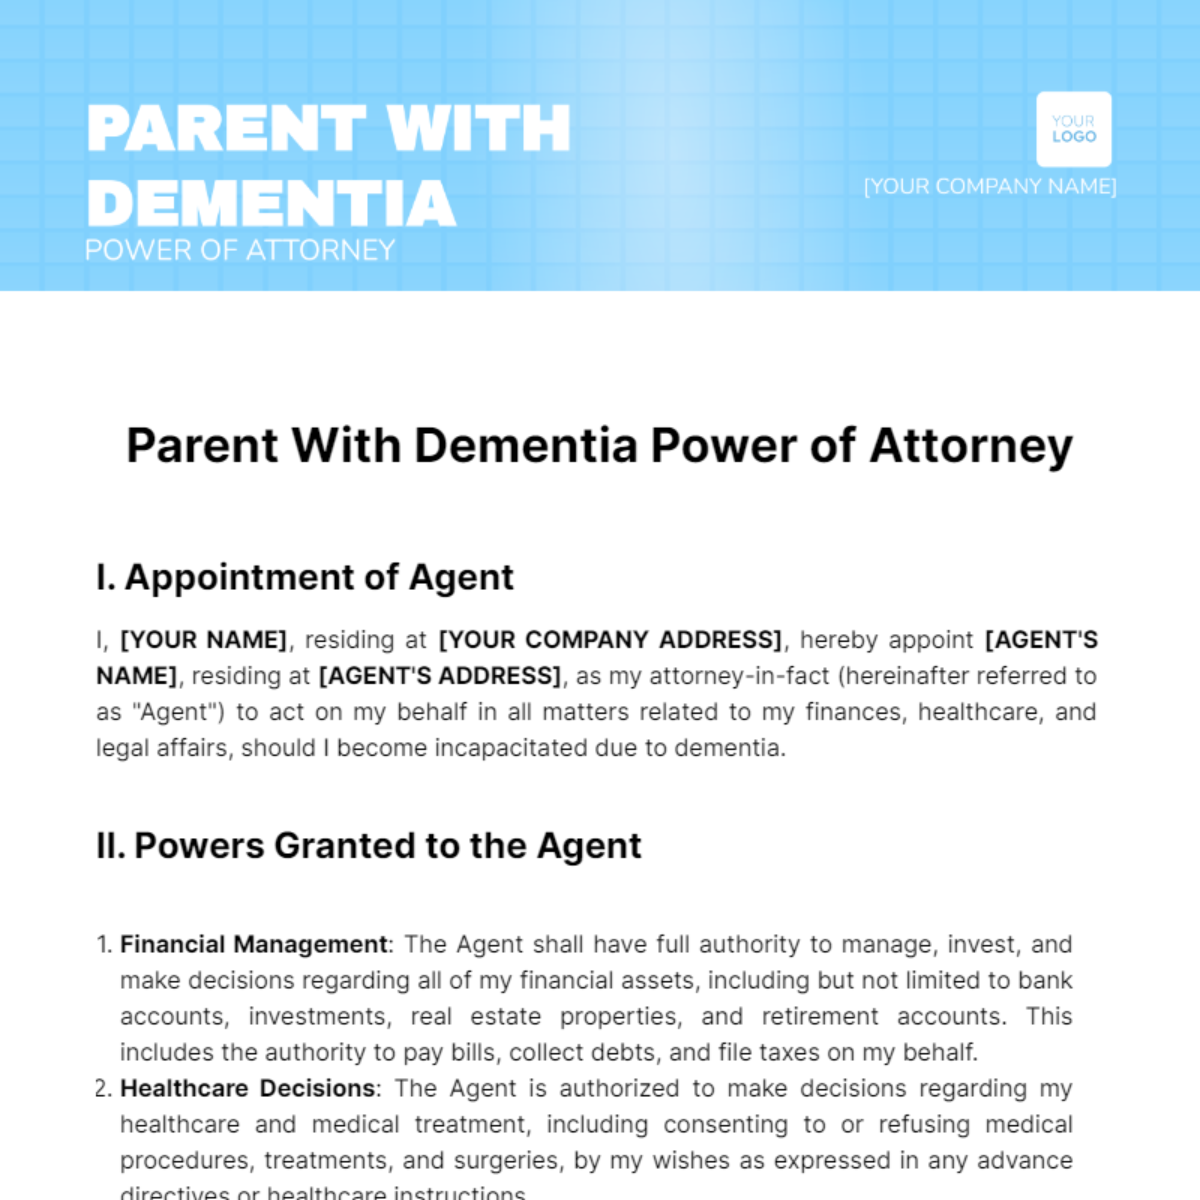 Parent With Dementia Power of Attorney Template